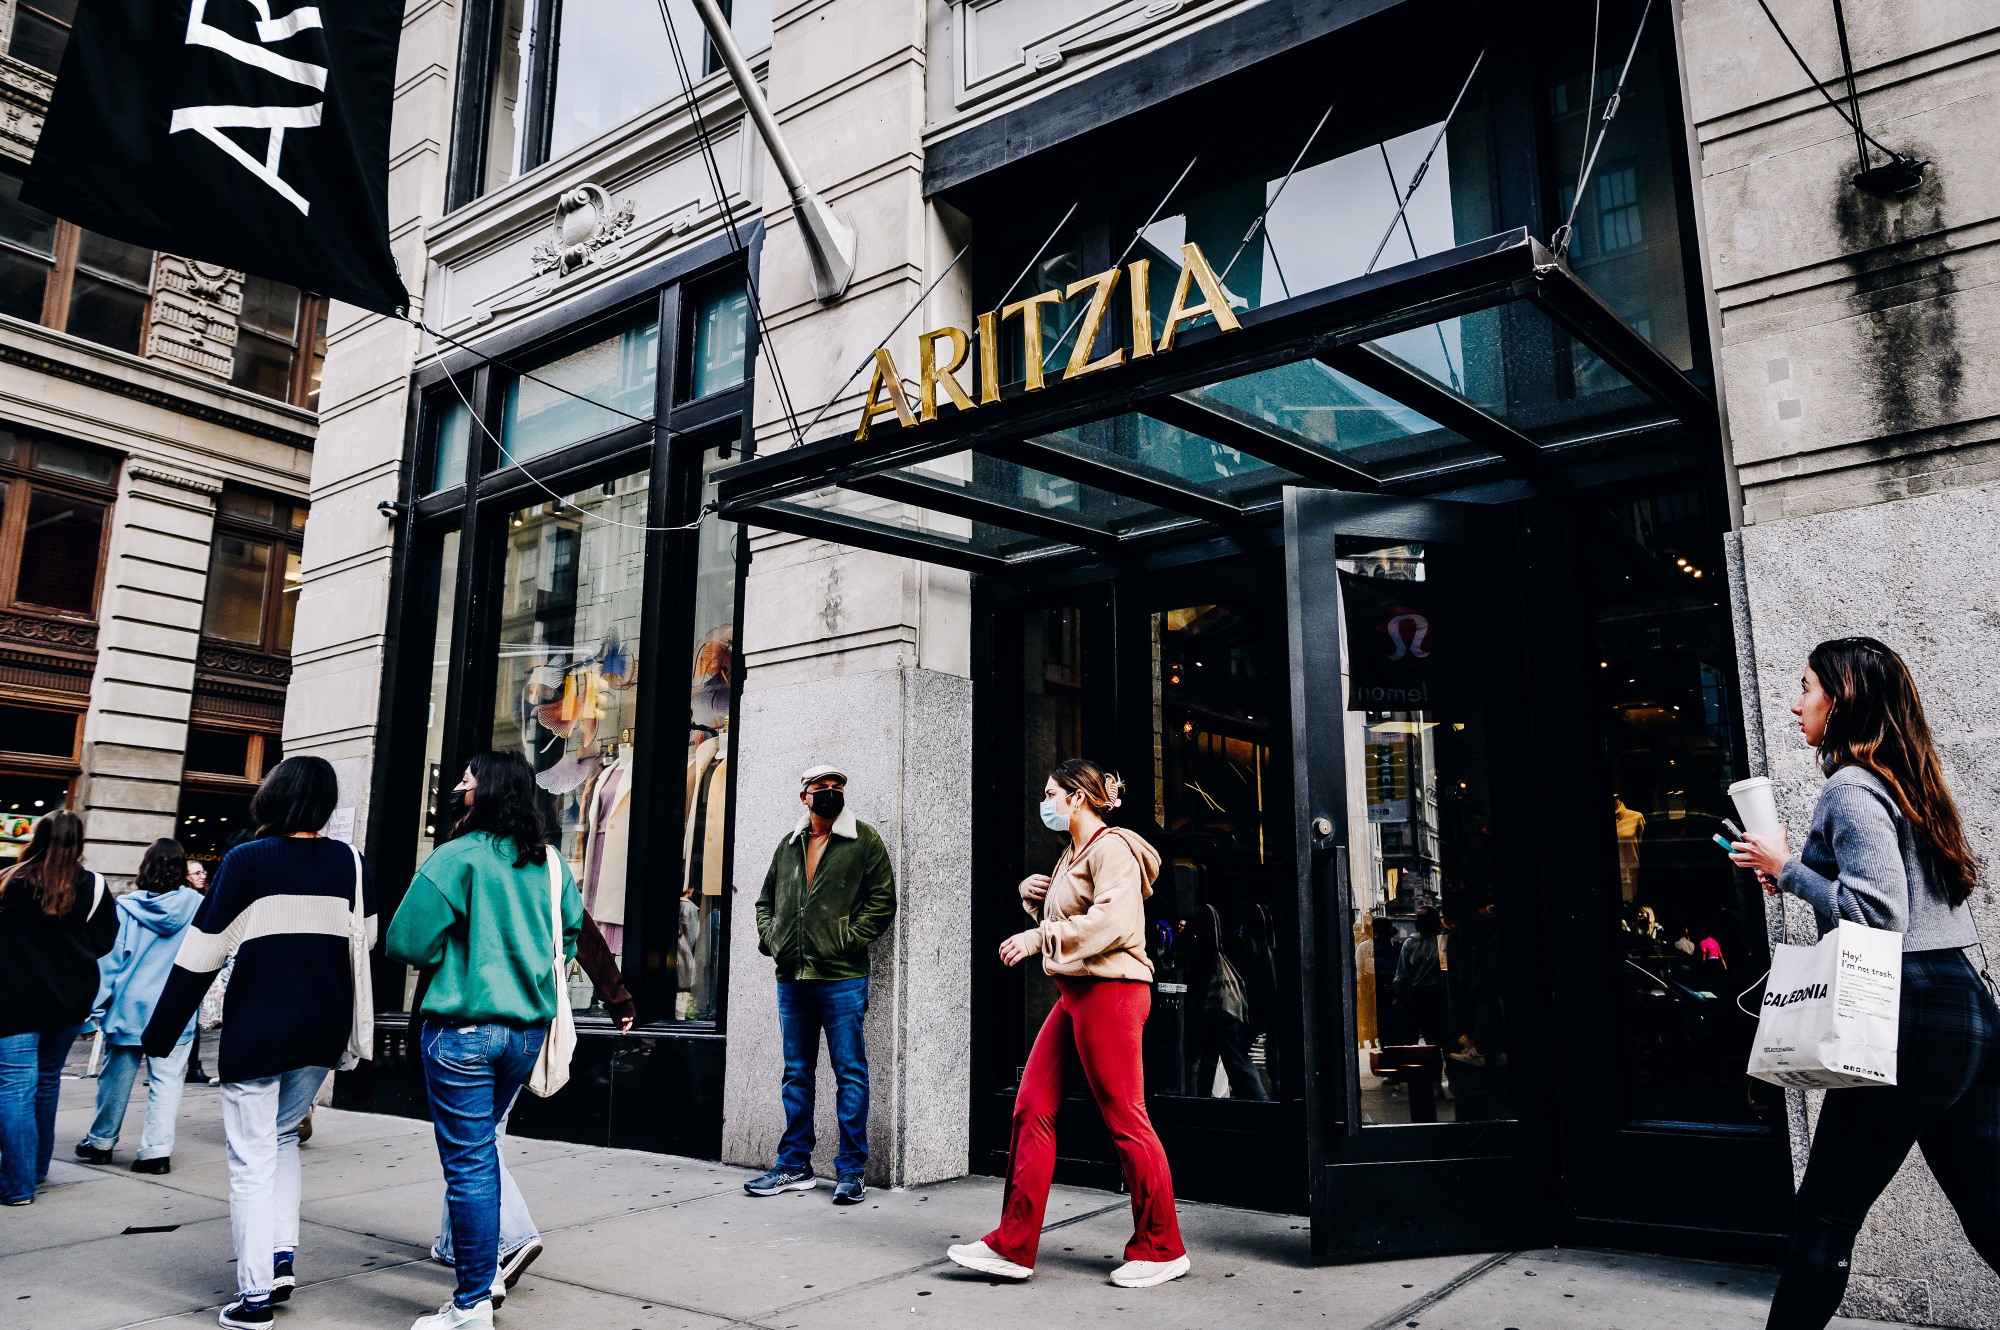 How Aritzia Stores Became the Hottest Fashion Chain in the US - Bloomberg